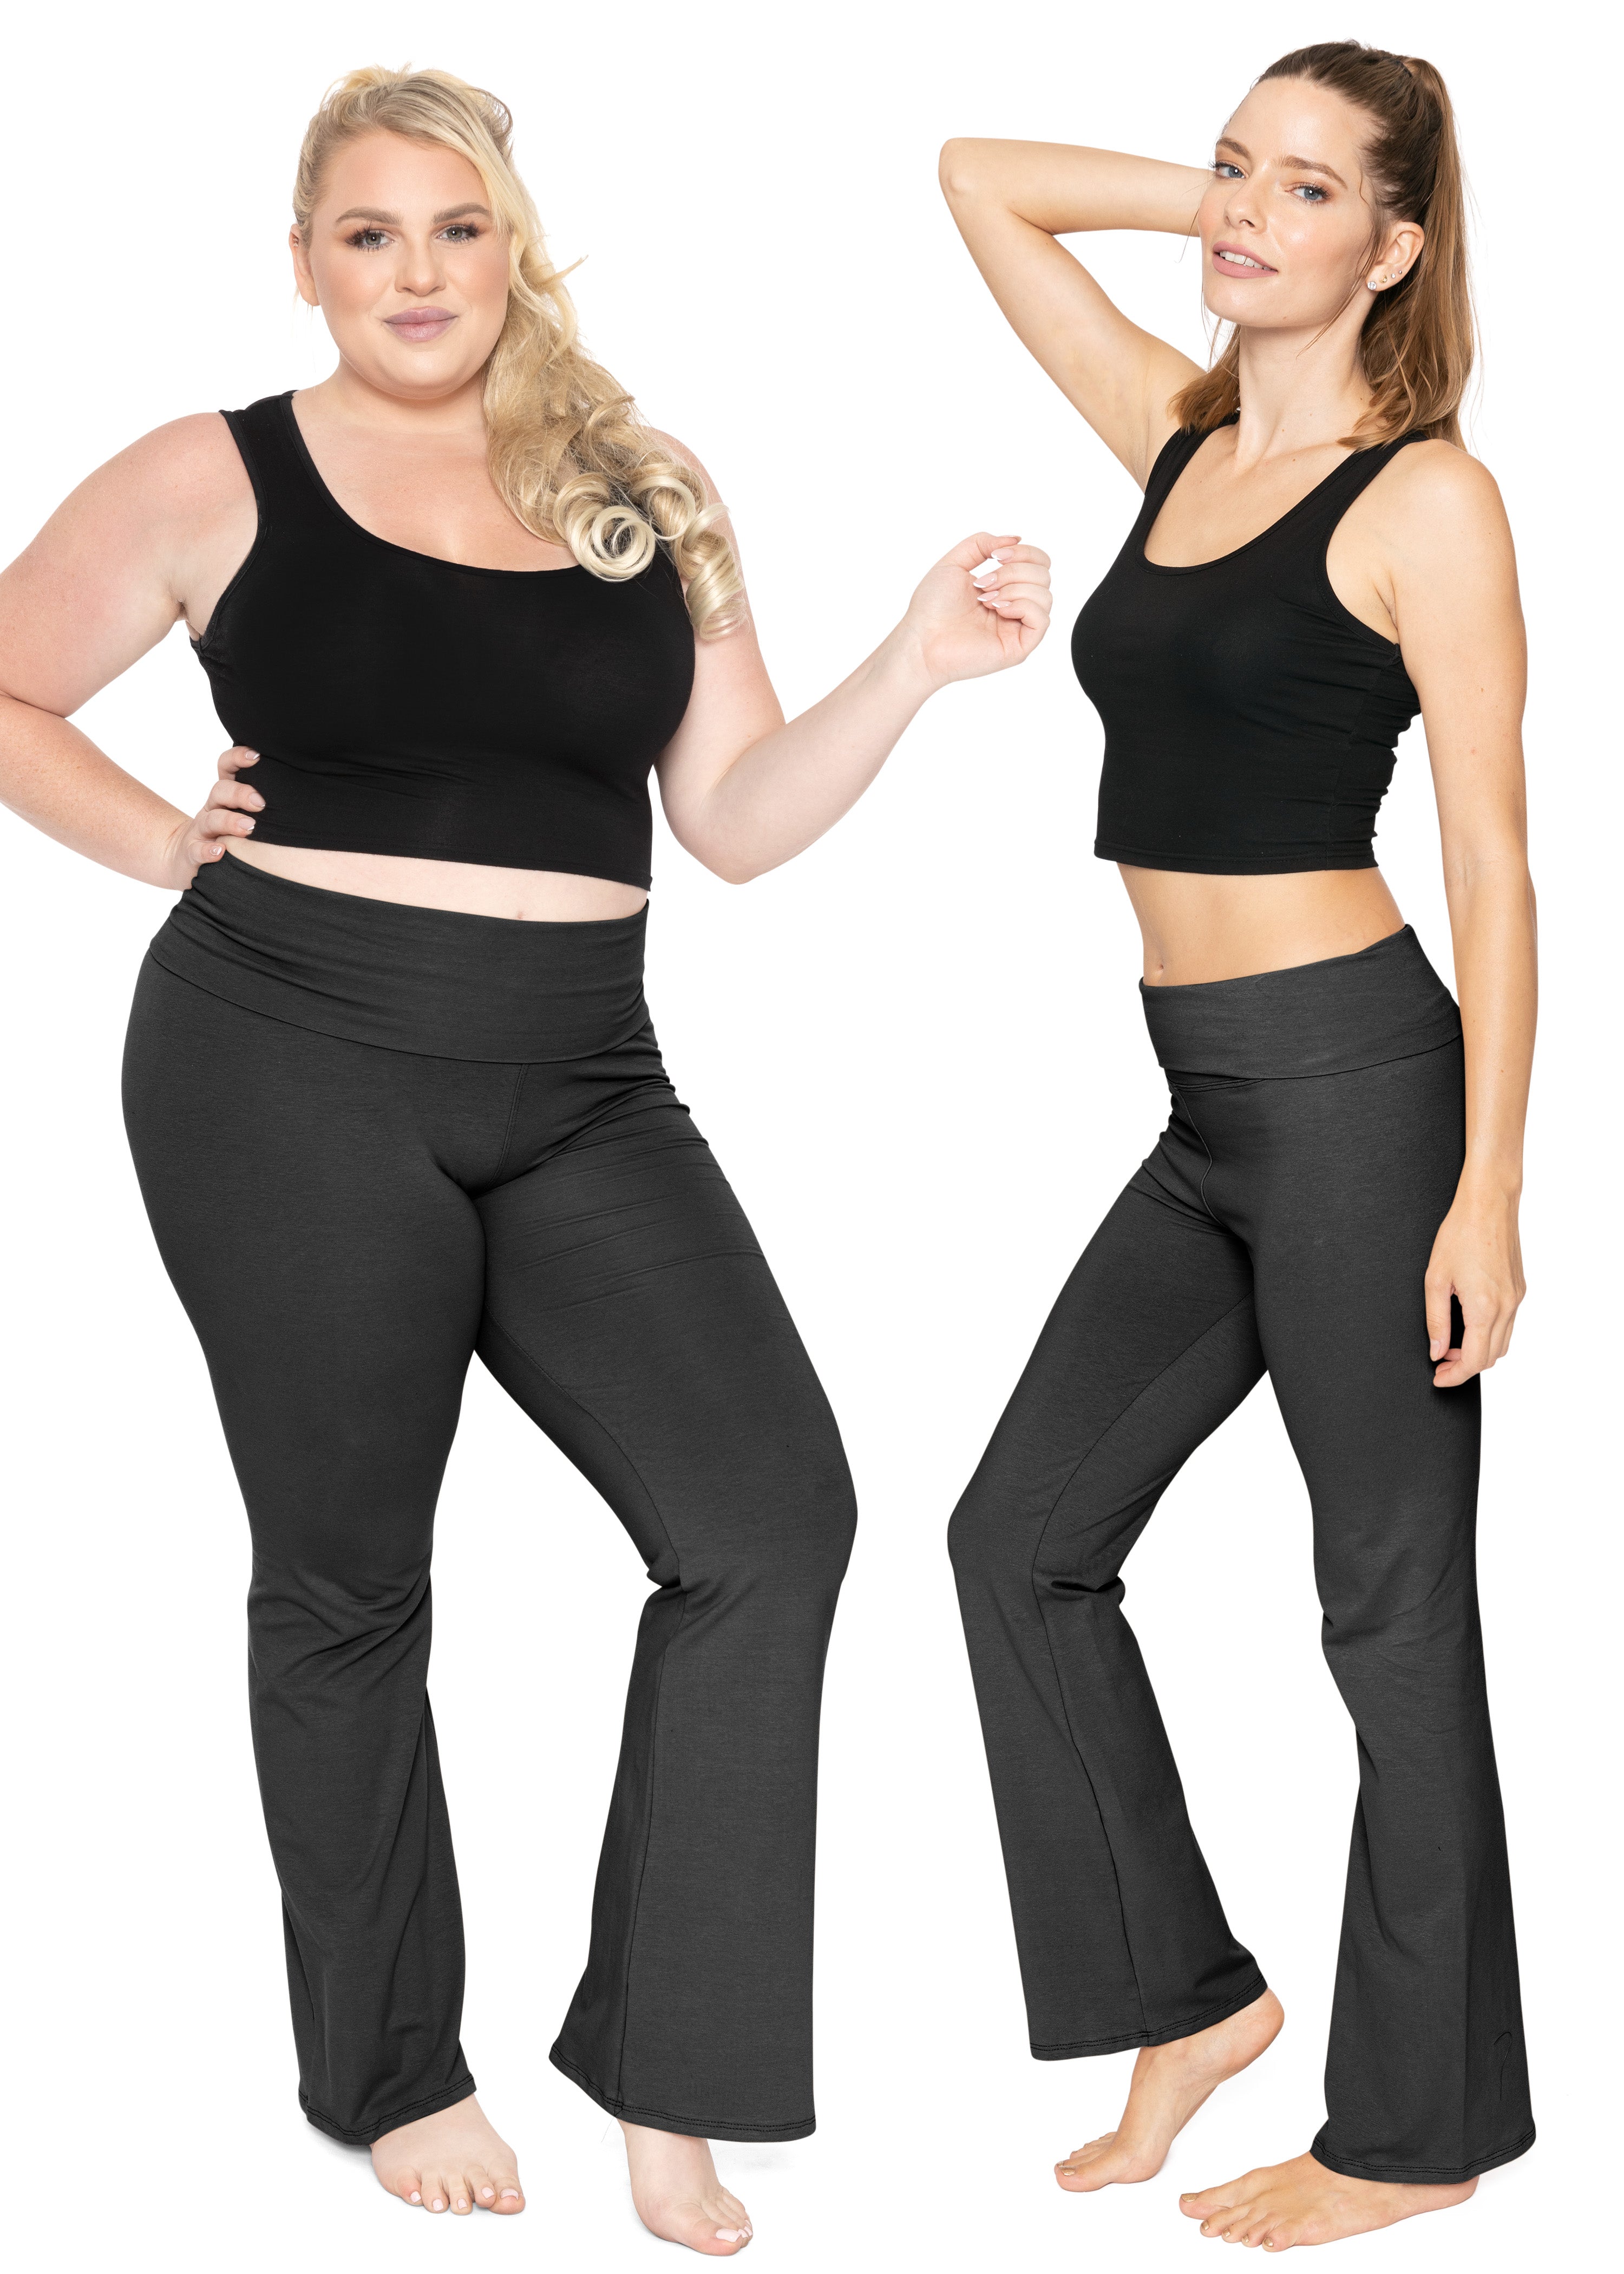 Stretch Is Comfort Women's Foldover Yoga Pant | Adult Small -7x - image 2 of 6